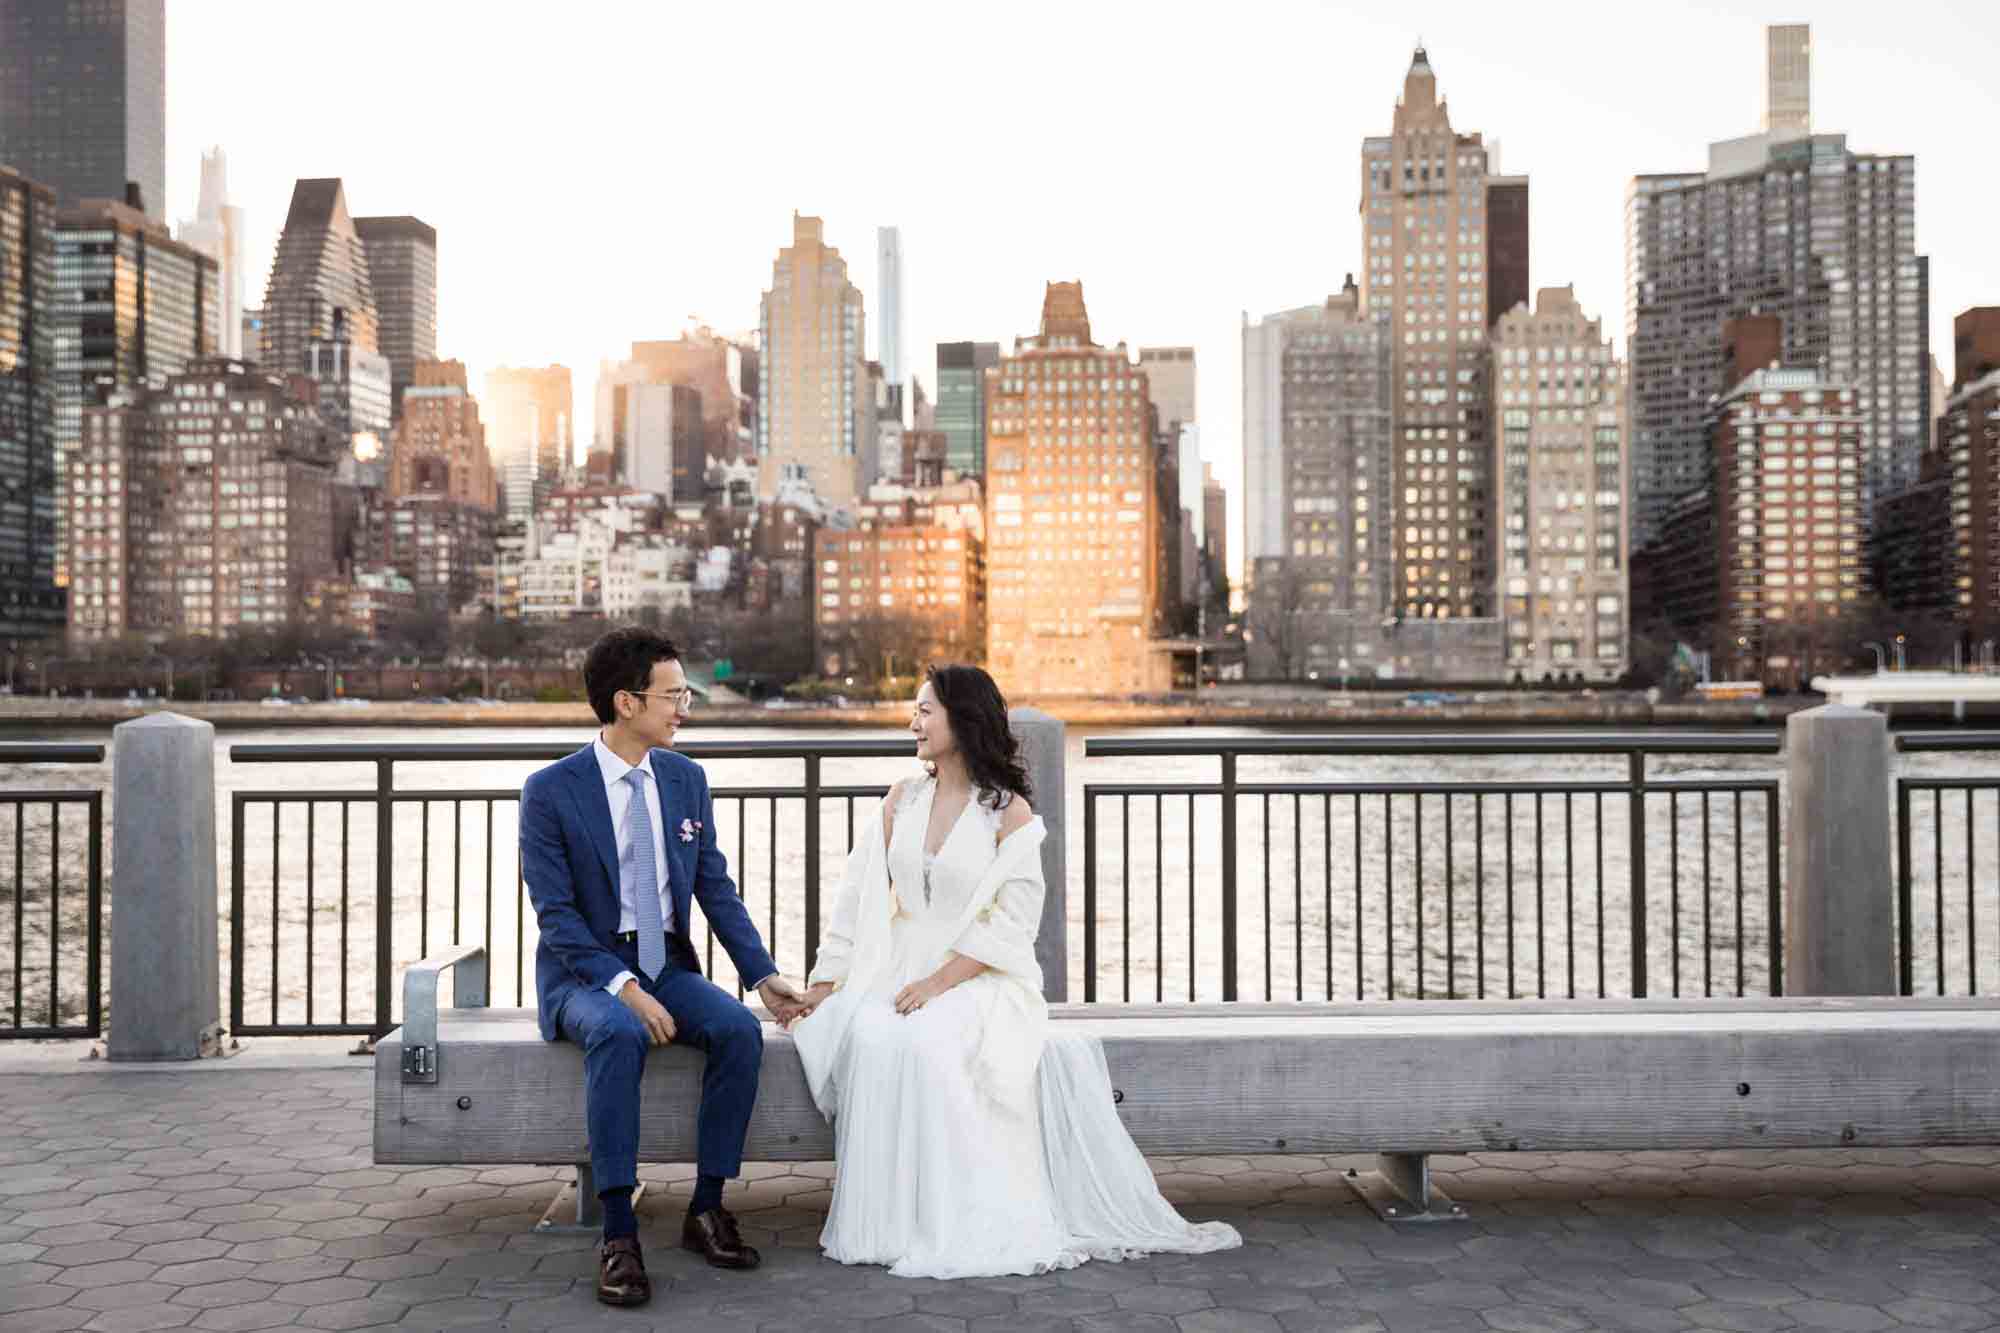 Roosevelt Island engagement photos of couple sitting on bench holding hands in front of NYC skyline